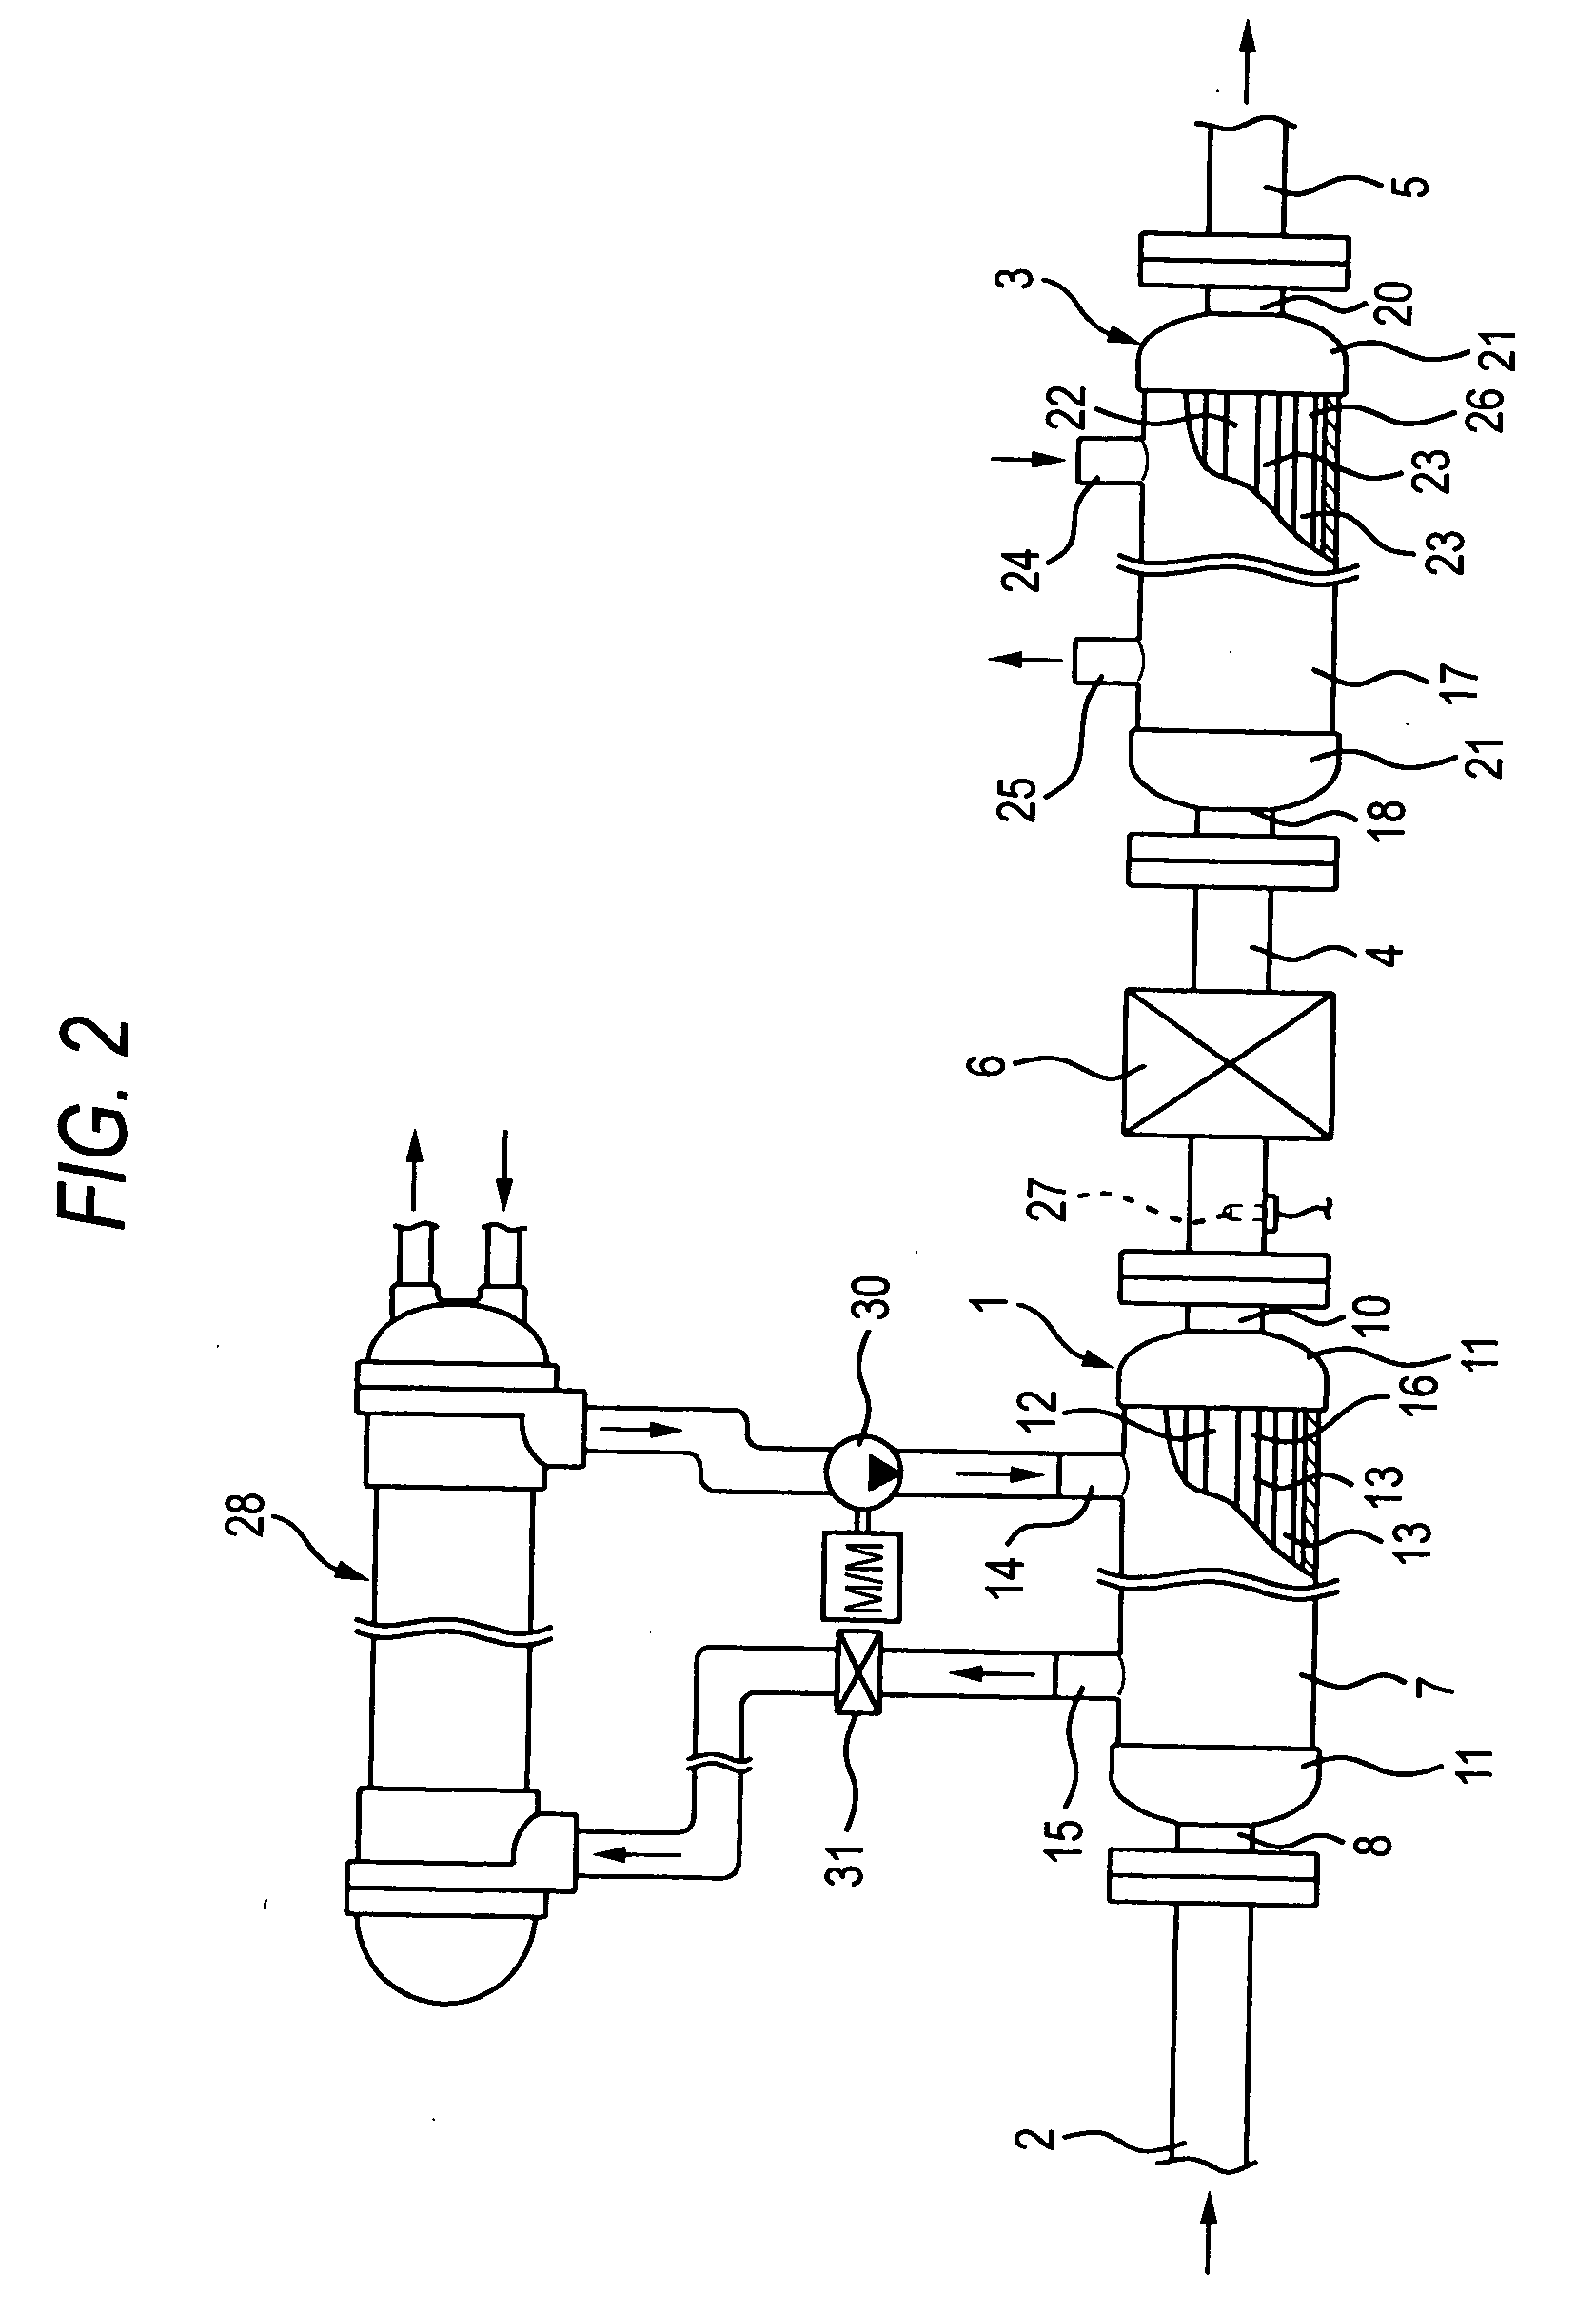 EGR gas cooling apparatus